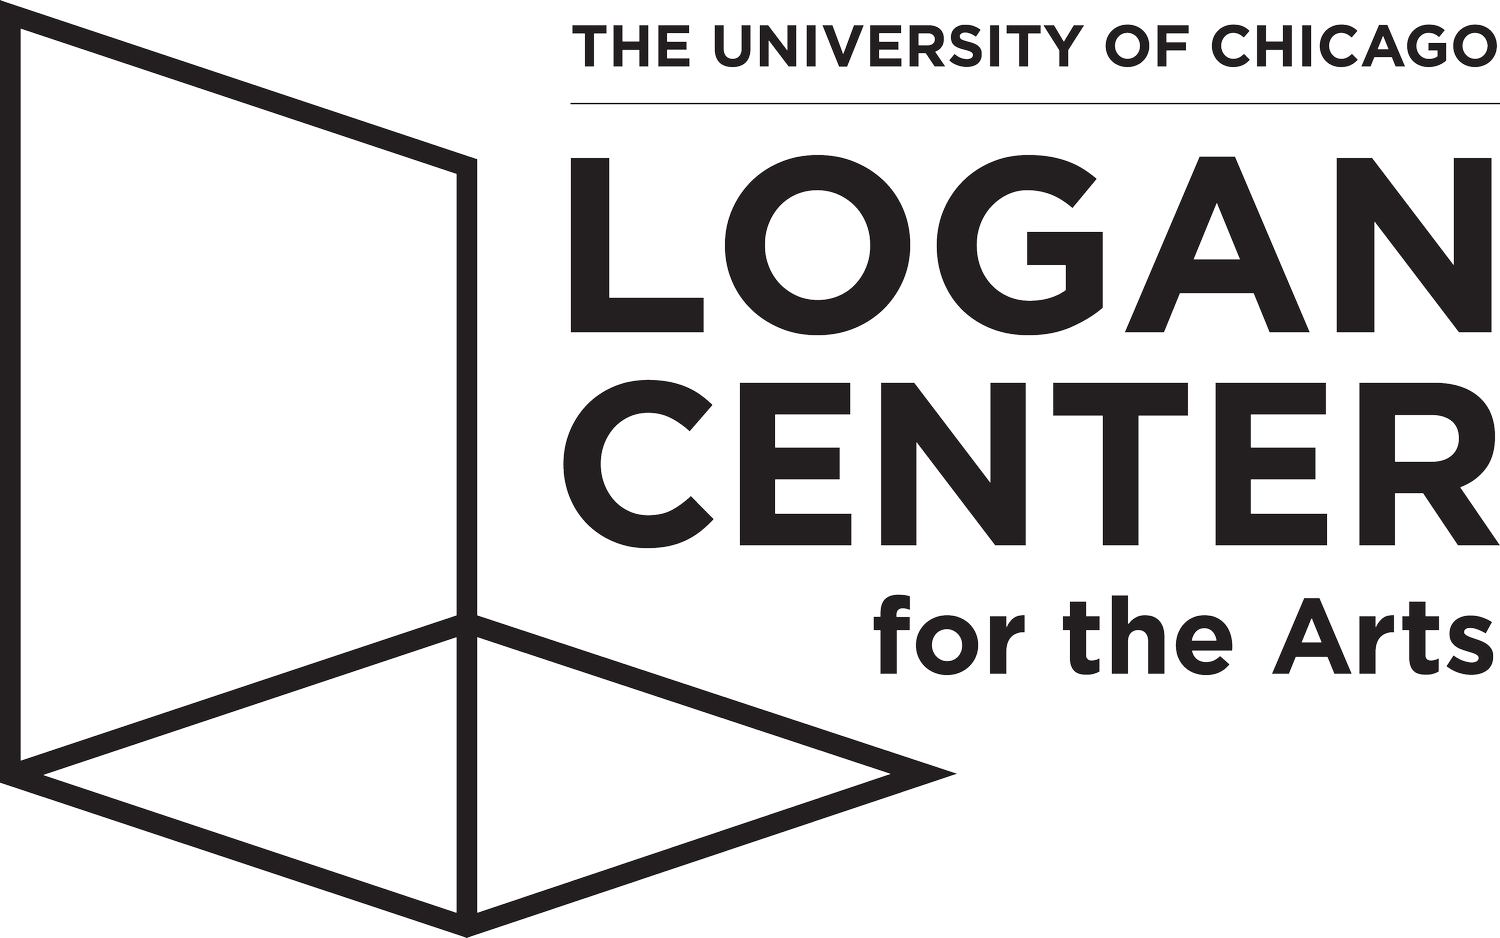 LOGAN CENTER FOR THE ARTS